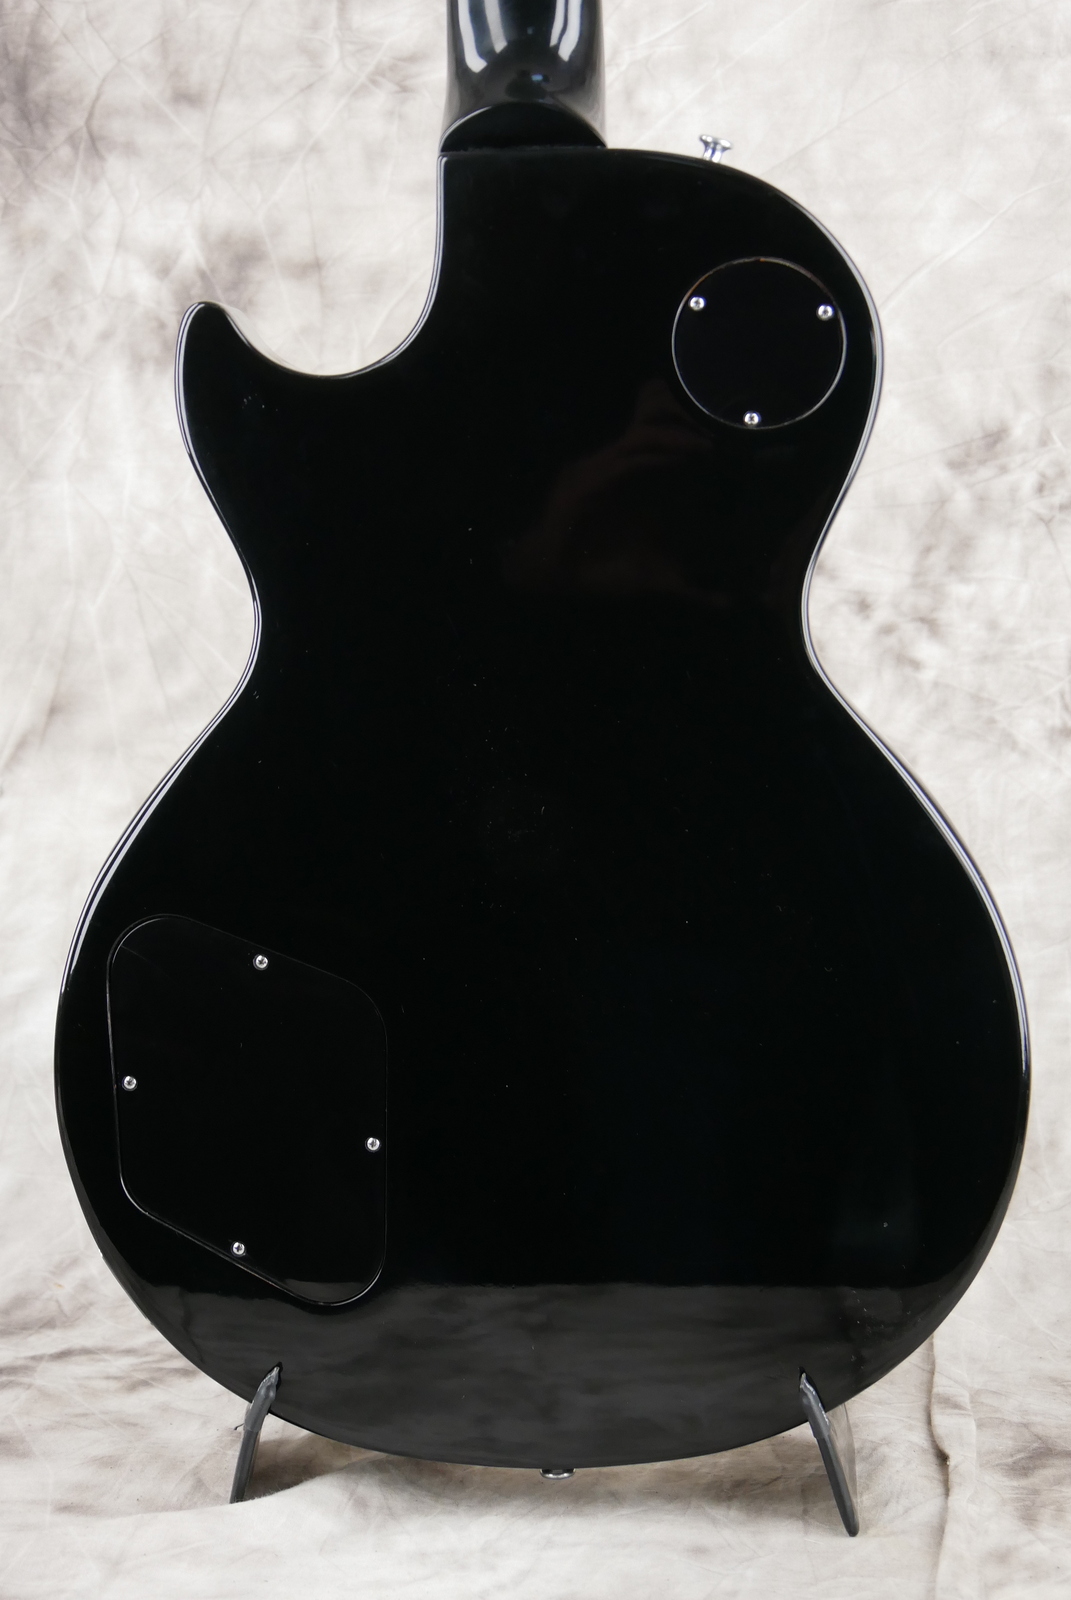 img/vintage/5337/Gibson_Les_Paul_Deluxe_limited_edtion_black_2000-004.JPG